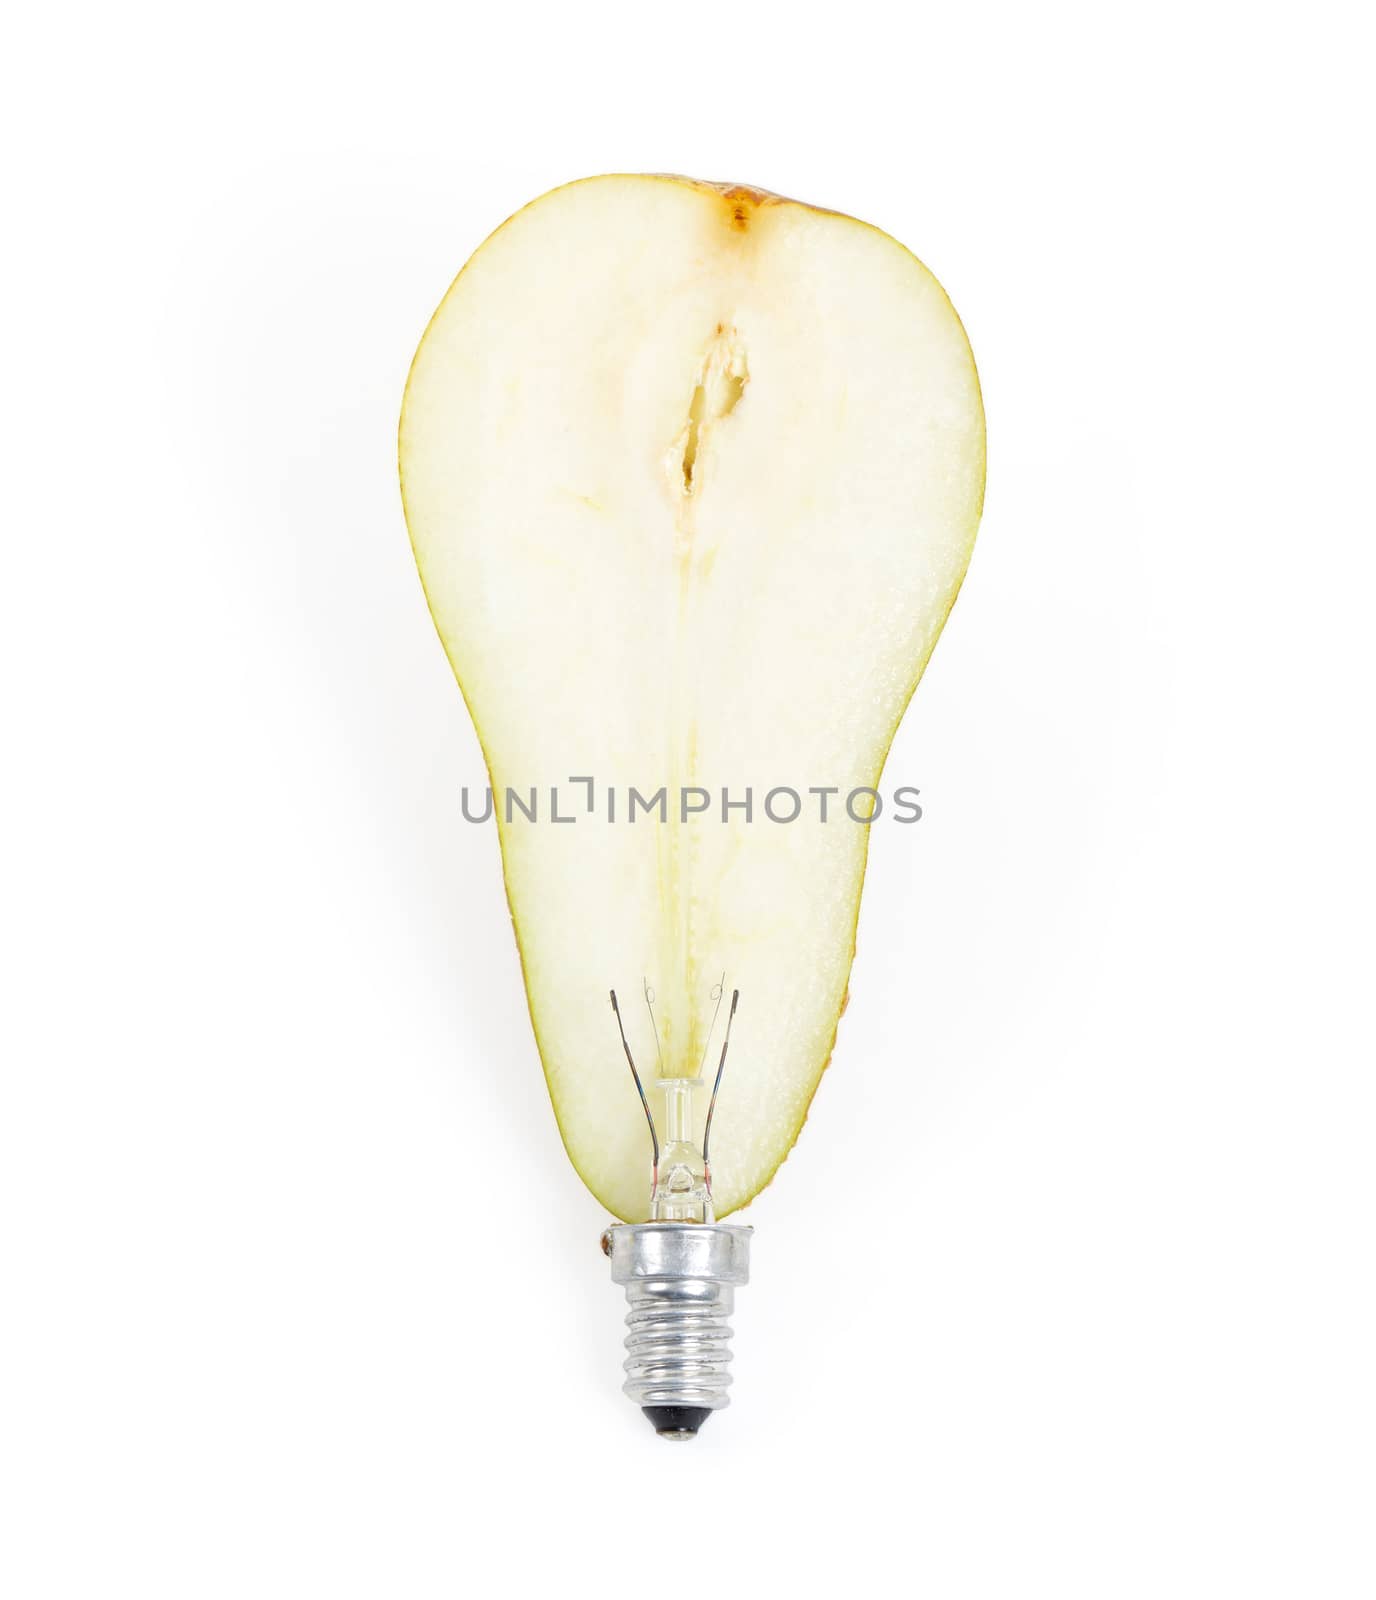 Light bulb made out of a pear - concept of green energy